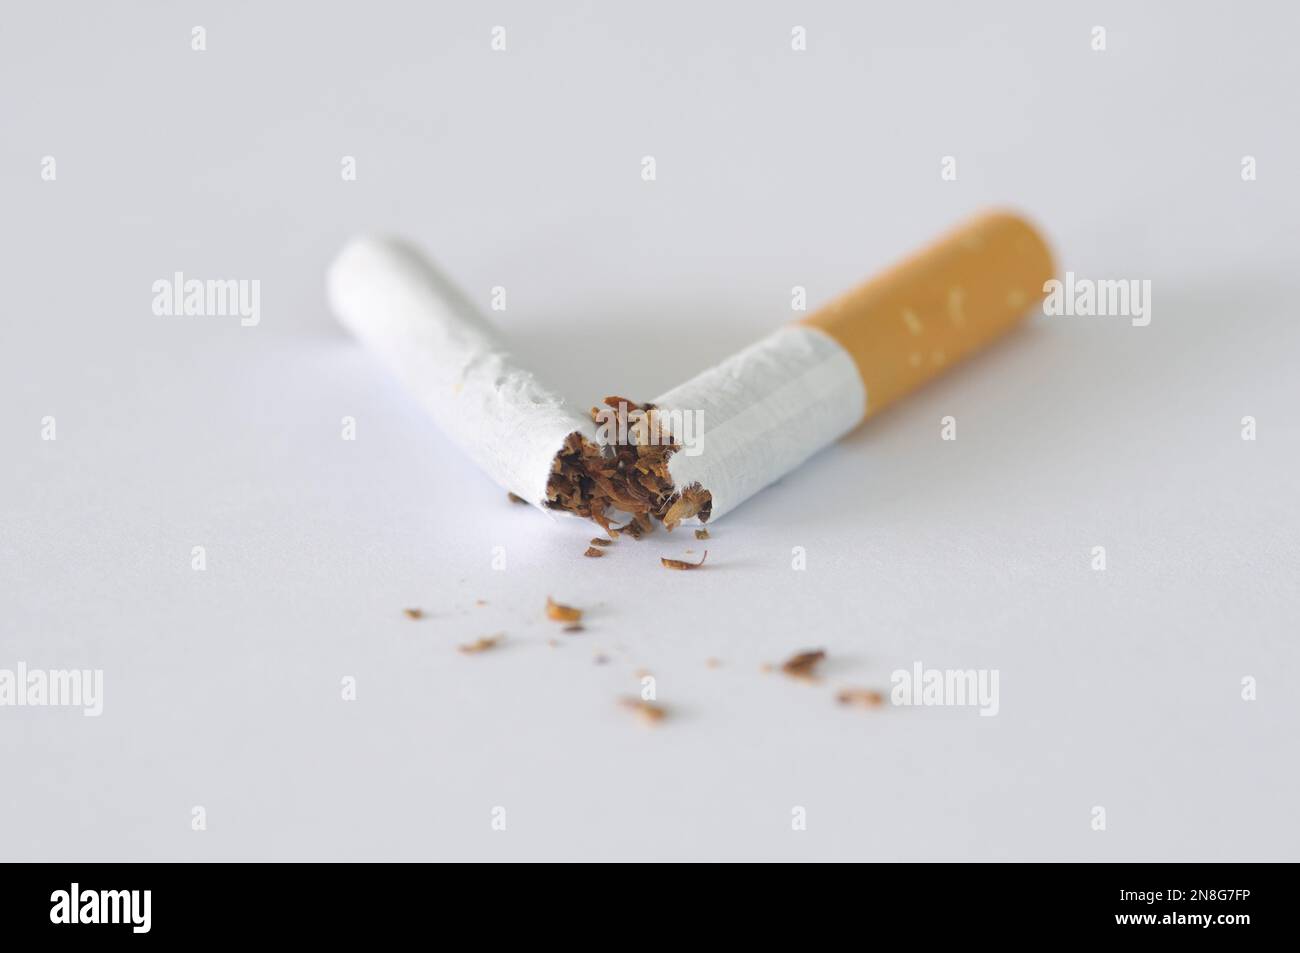 Close-up of a cigarette broken in half on a white background.  Concepts: Quit smoking, Stop smoking, Giving up smoking, Smoking addiction, Bad habits Stock Photo